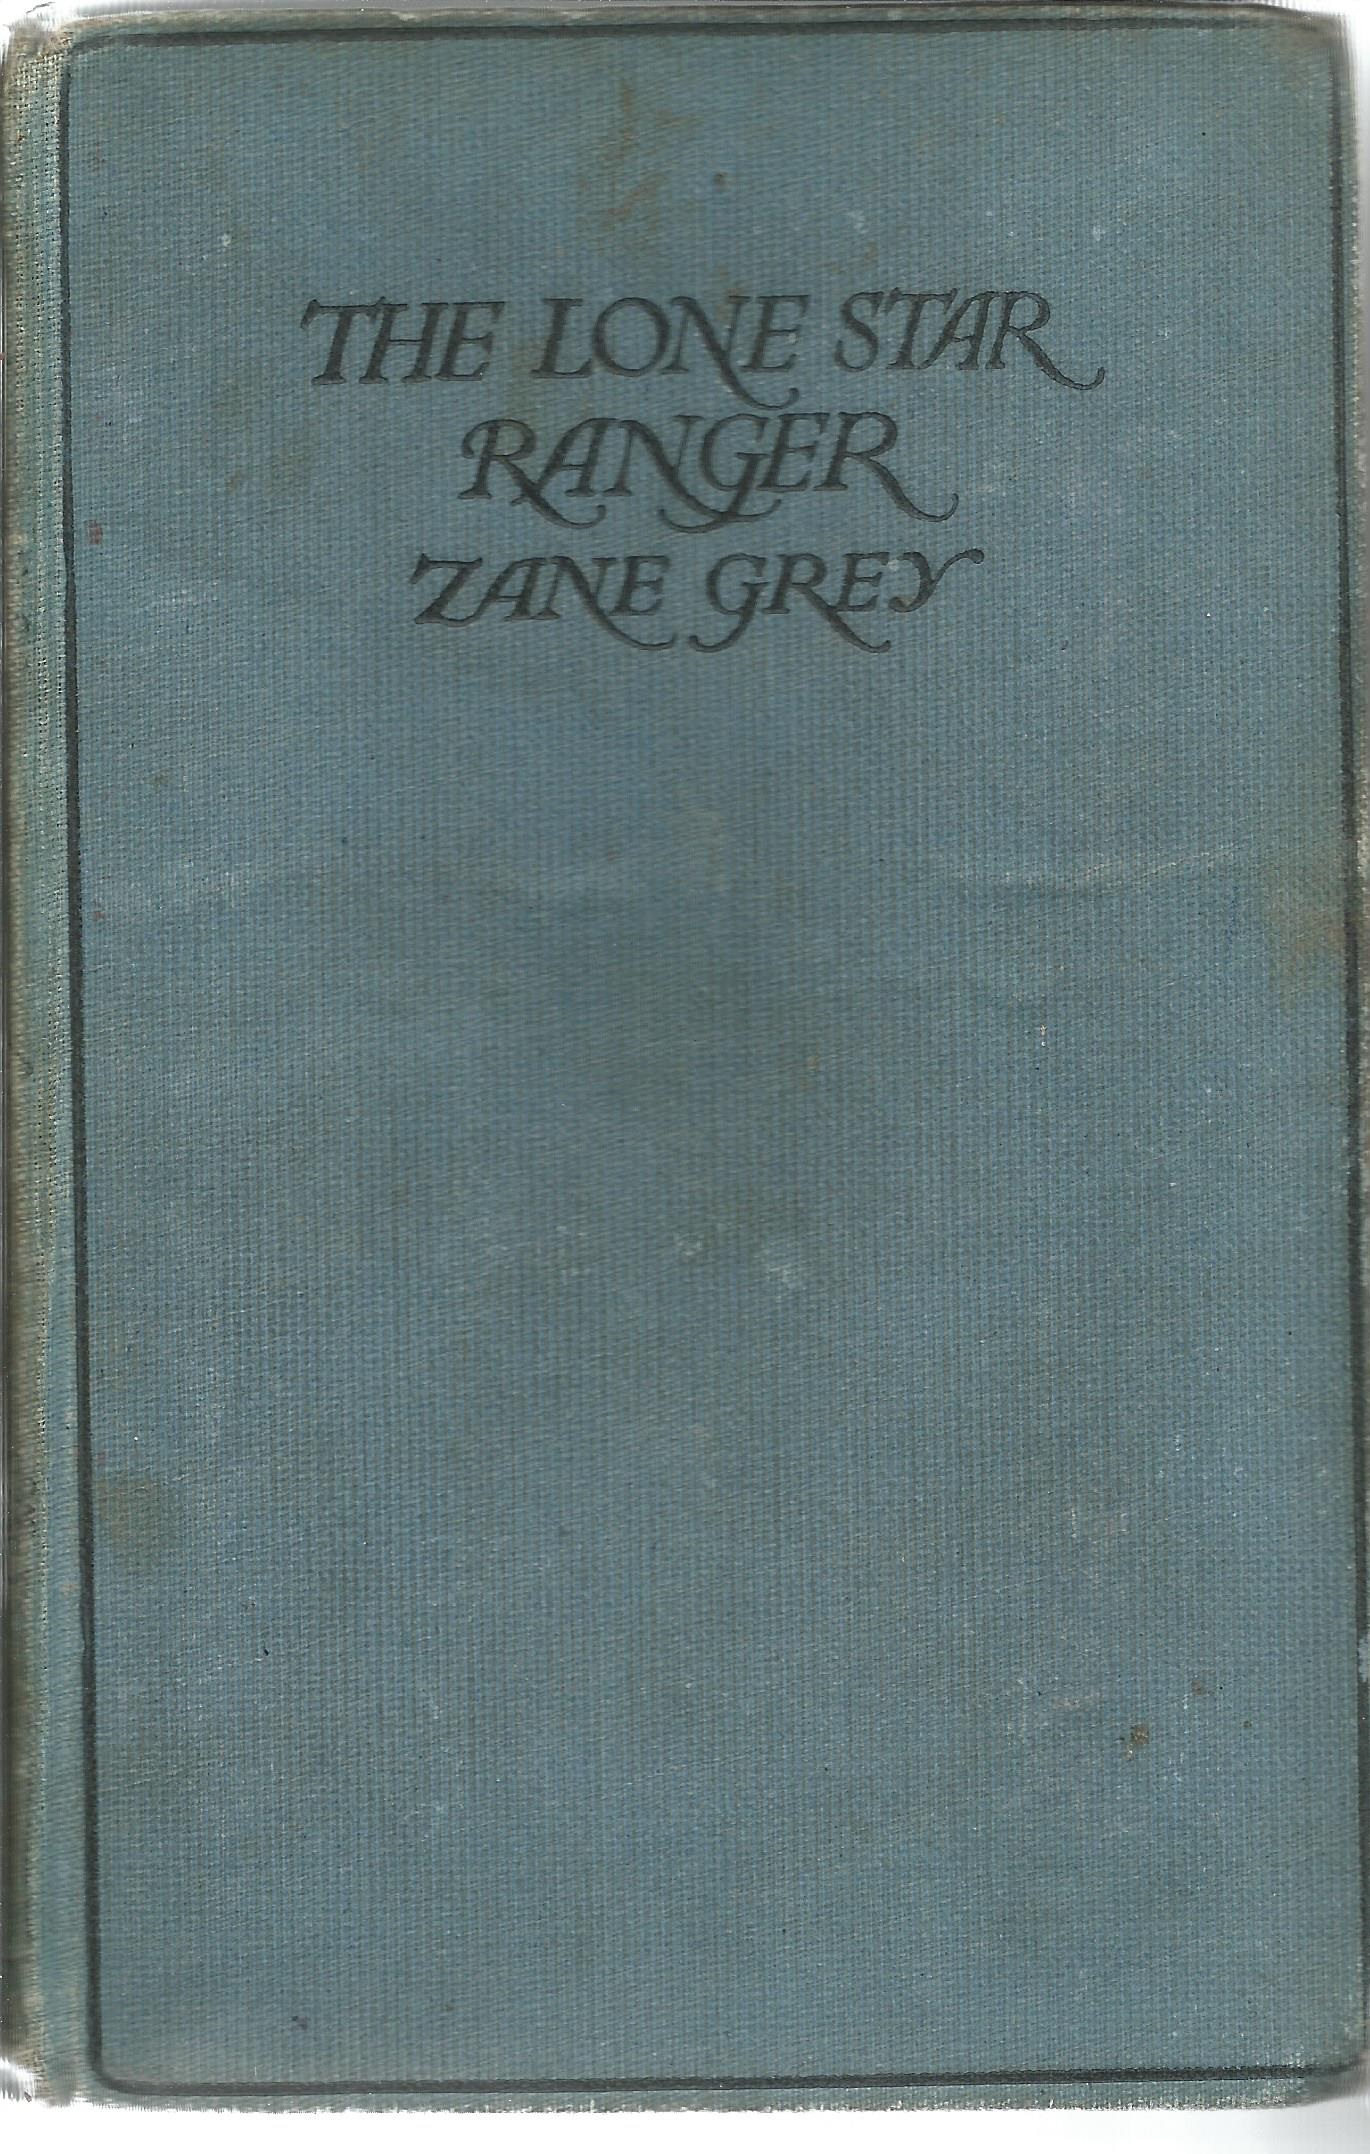 The Lone Star Ranger by Zane Grey. Unsigned hardback book with no dust jacket, printed in Great